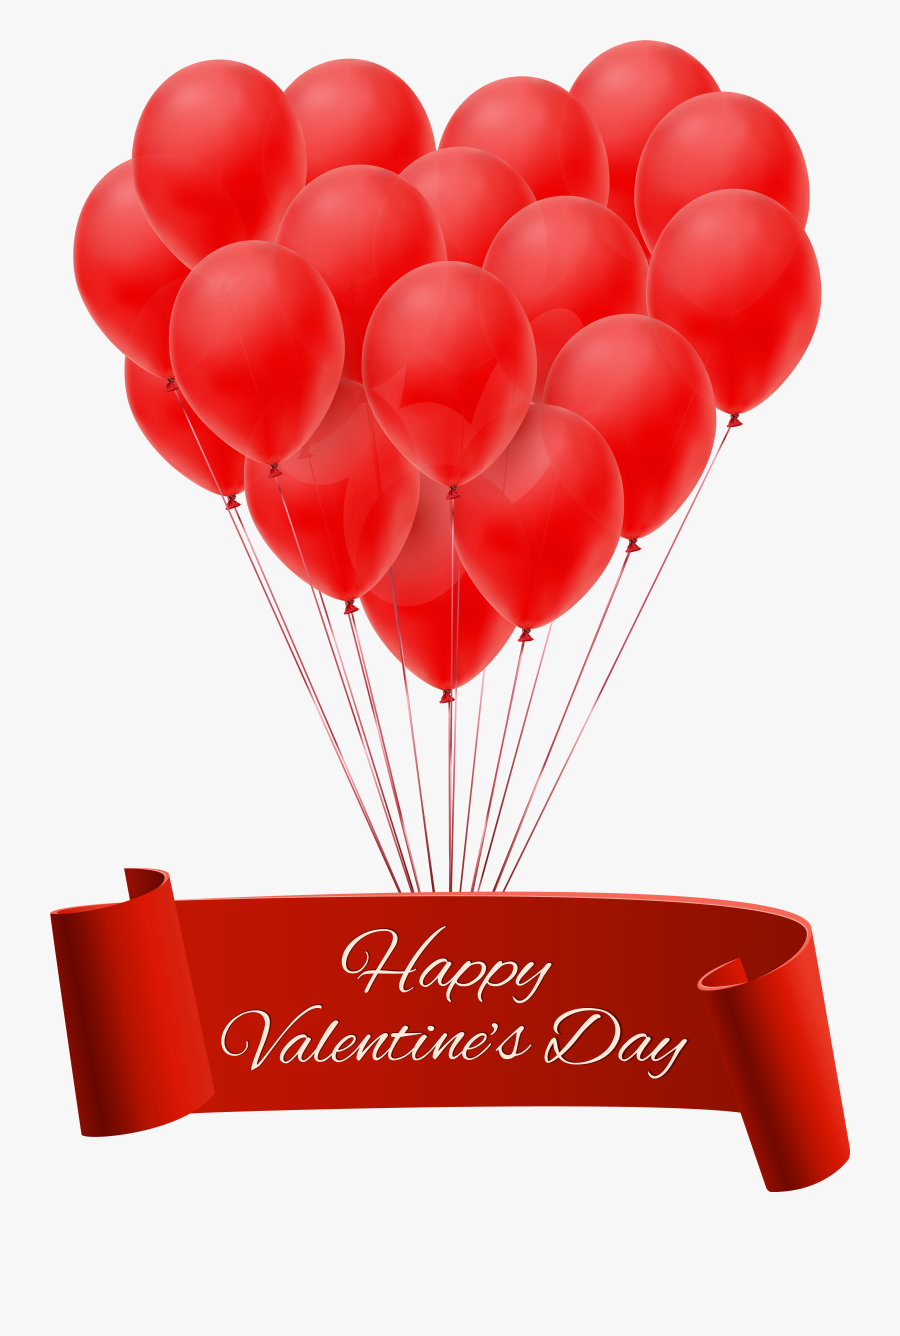 Happy Valentine"s Day Banner With Balloons Png Clip - Happy New Year 2019 In Advance, Transparent Clipart